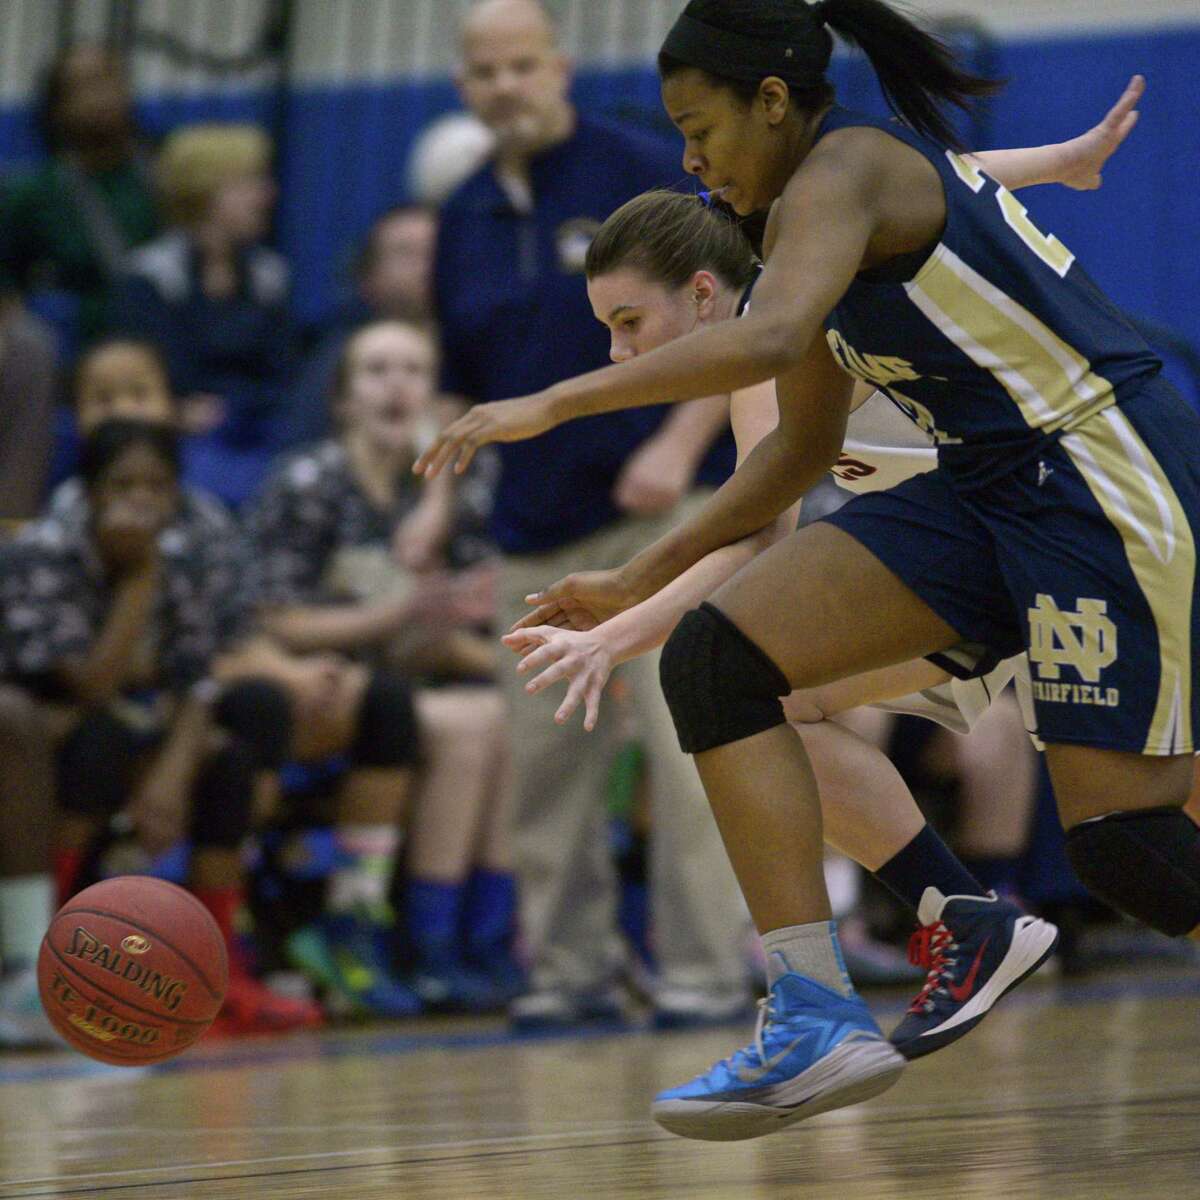 New Fairfield's Emily Farrell (2) and Notre Dame's Gabrielle Joseph (21) chase down a loose ball during the 1st half of the SWC Girls Basketball Championship Game between Notre Dame - Fairfield and New Fairfield high schools, played at Newtown High School, Newtown, Conn, on Thursday night, February 26, 2015.